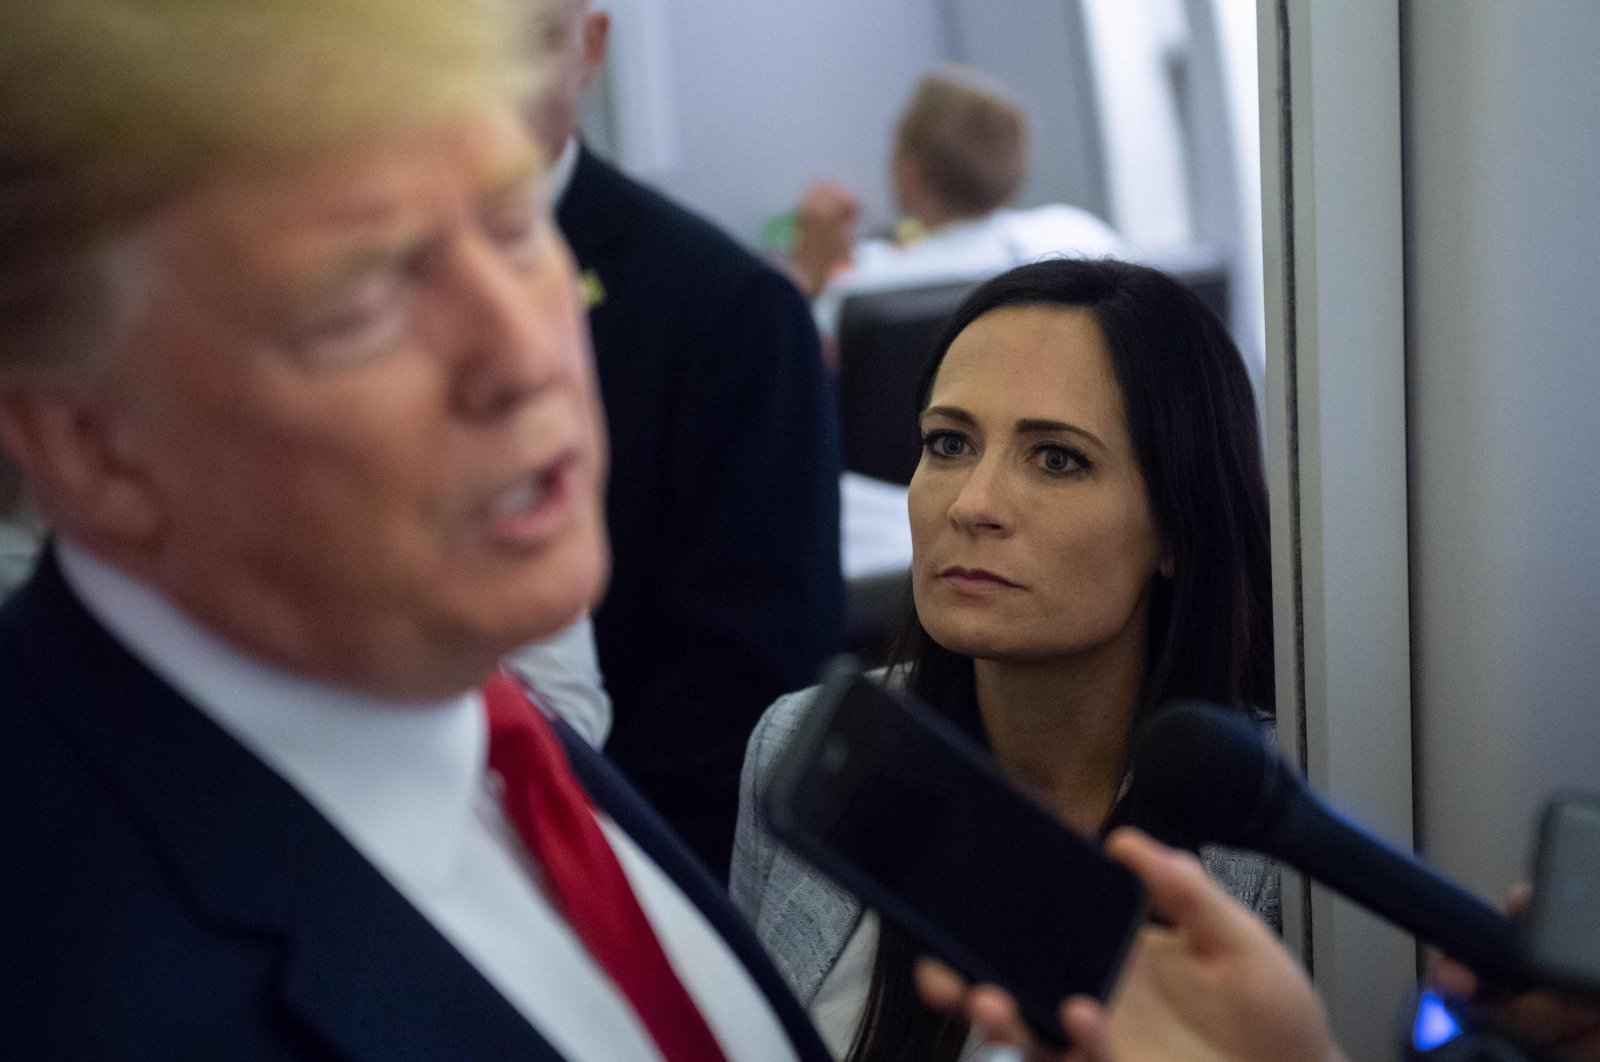 Former White House press secretary Stephanie Grisham listens as U.S. President Donald Trump speaks to the media aboard Air Force One while flying between El Paso, Texas and Joint Base Andrews in Maryland, Aug. 7, 2019. (AFP Photo)